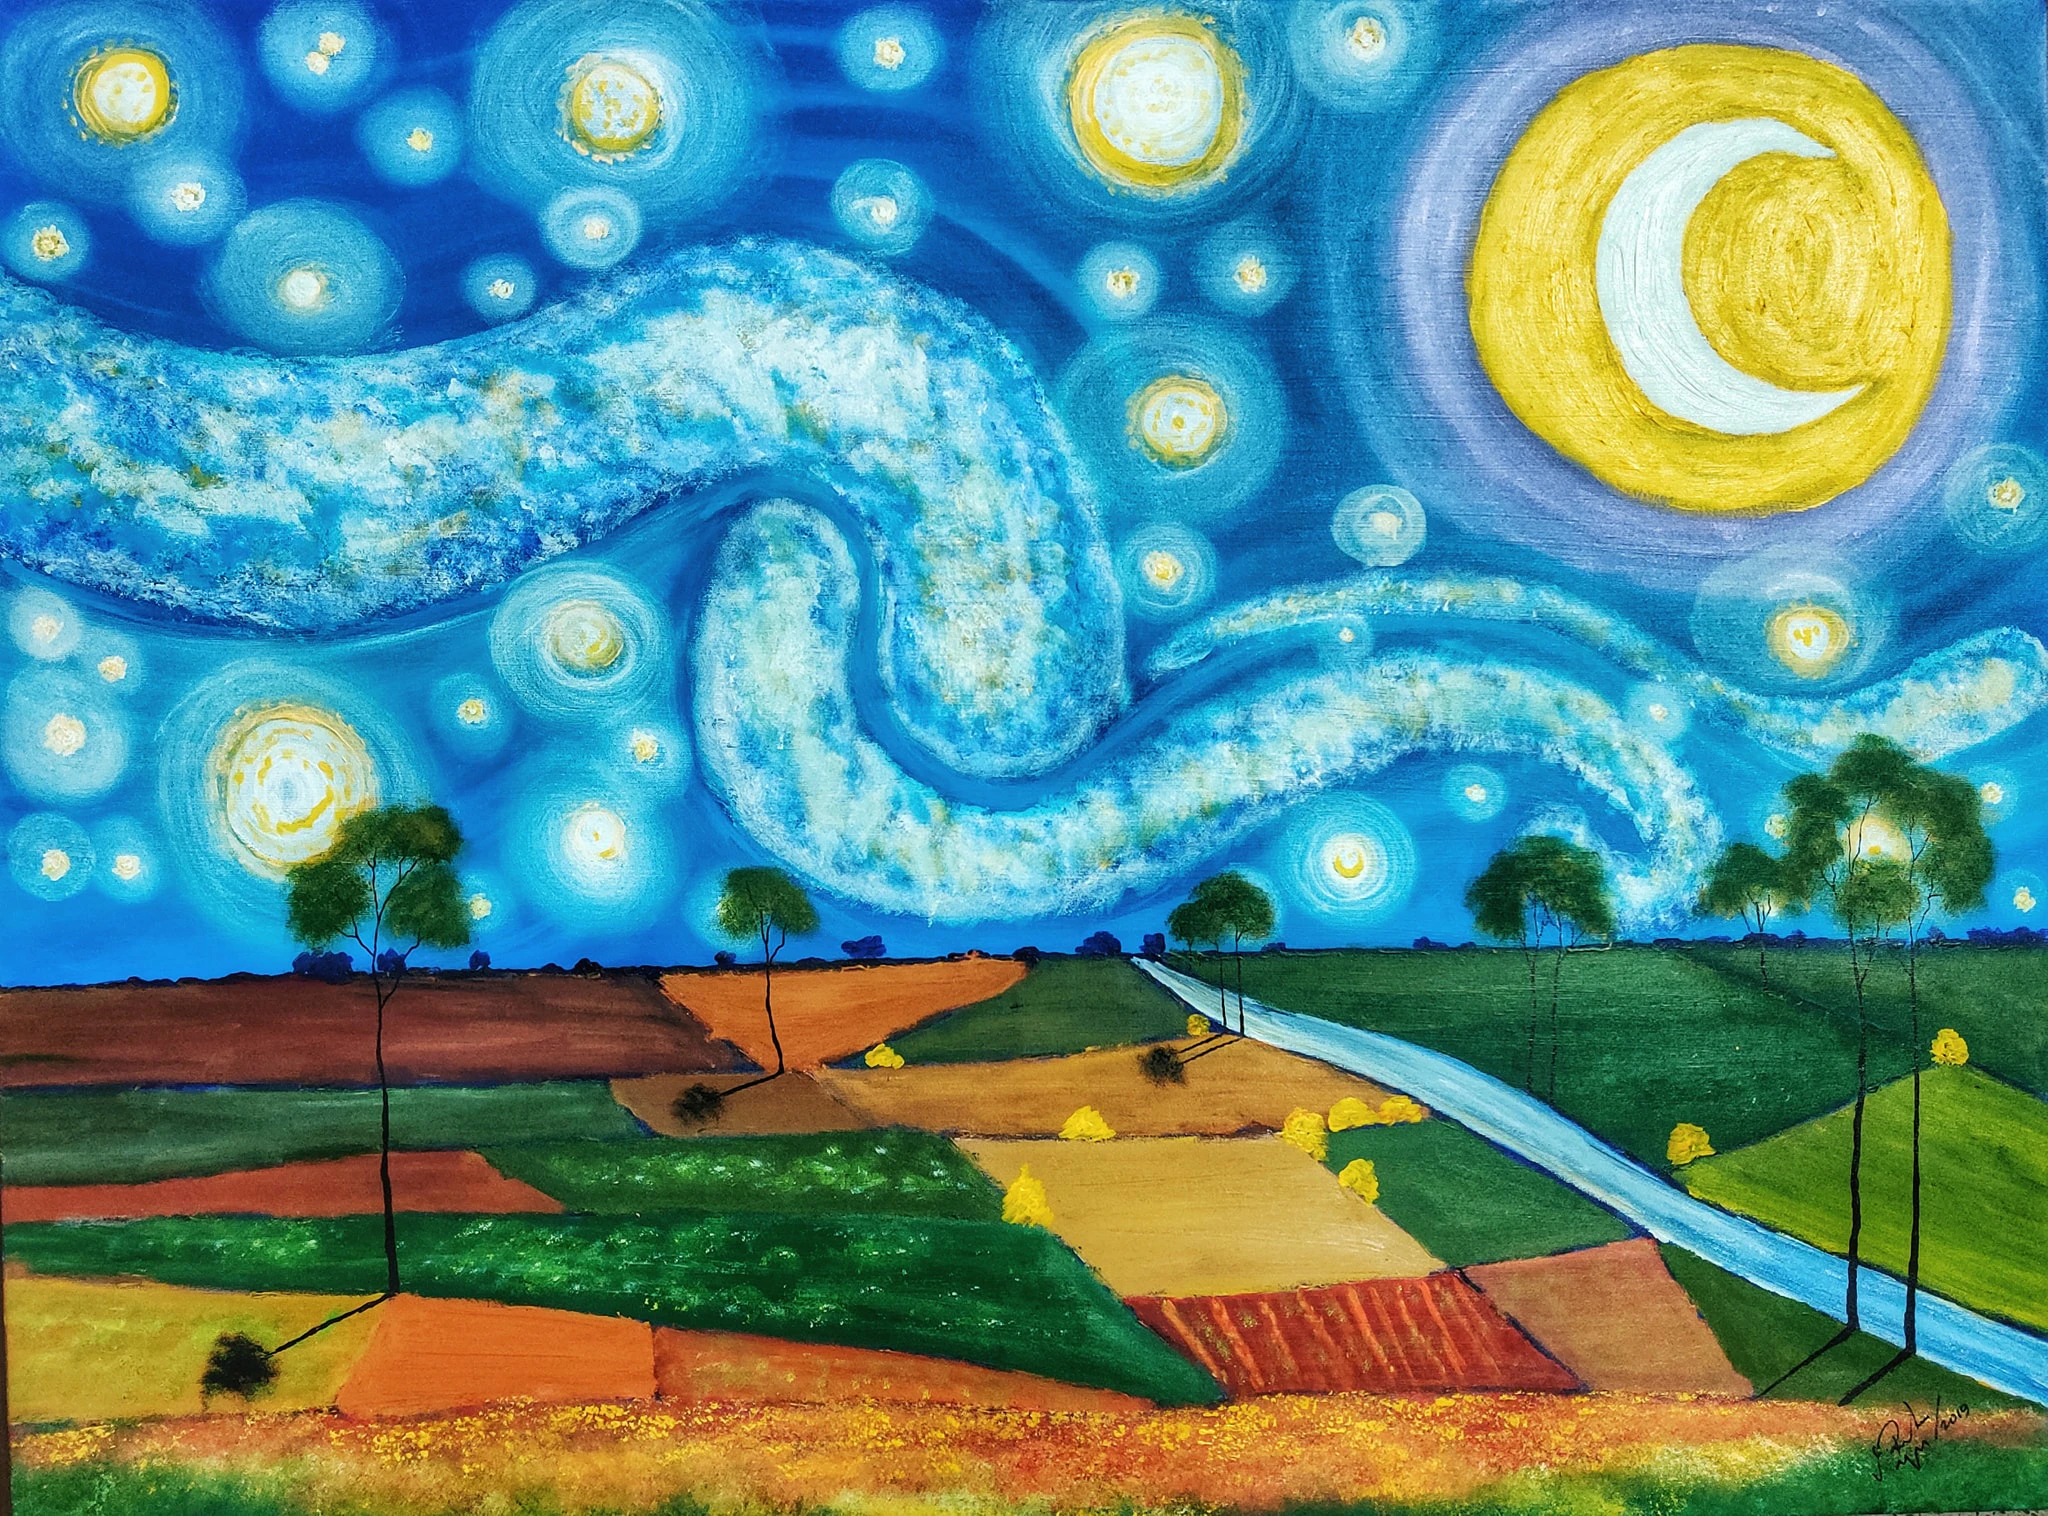 The Deluded Starry Night